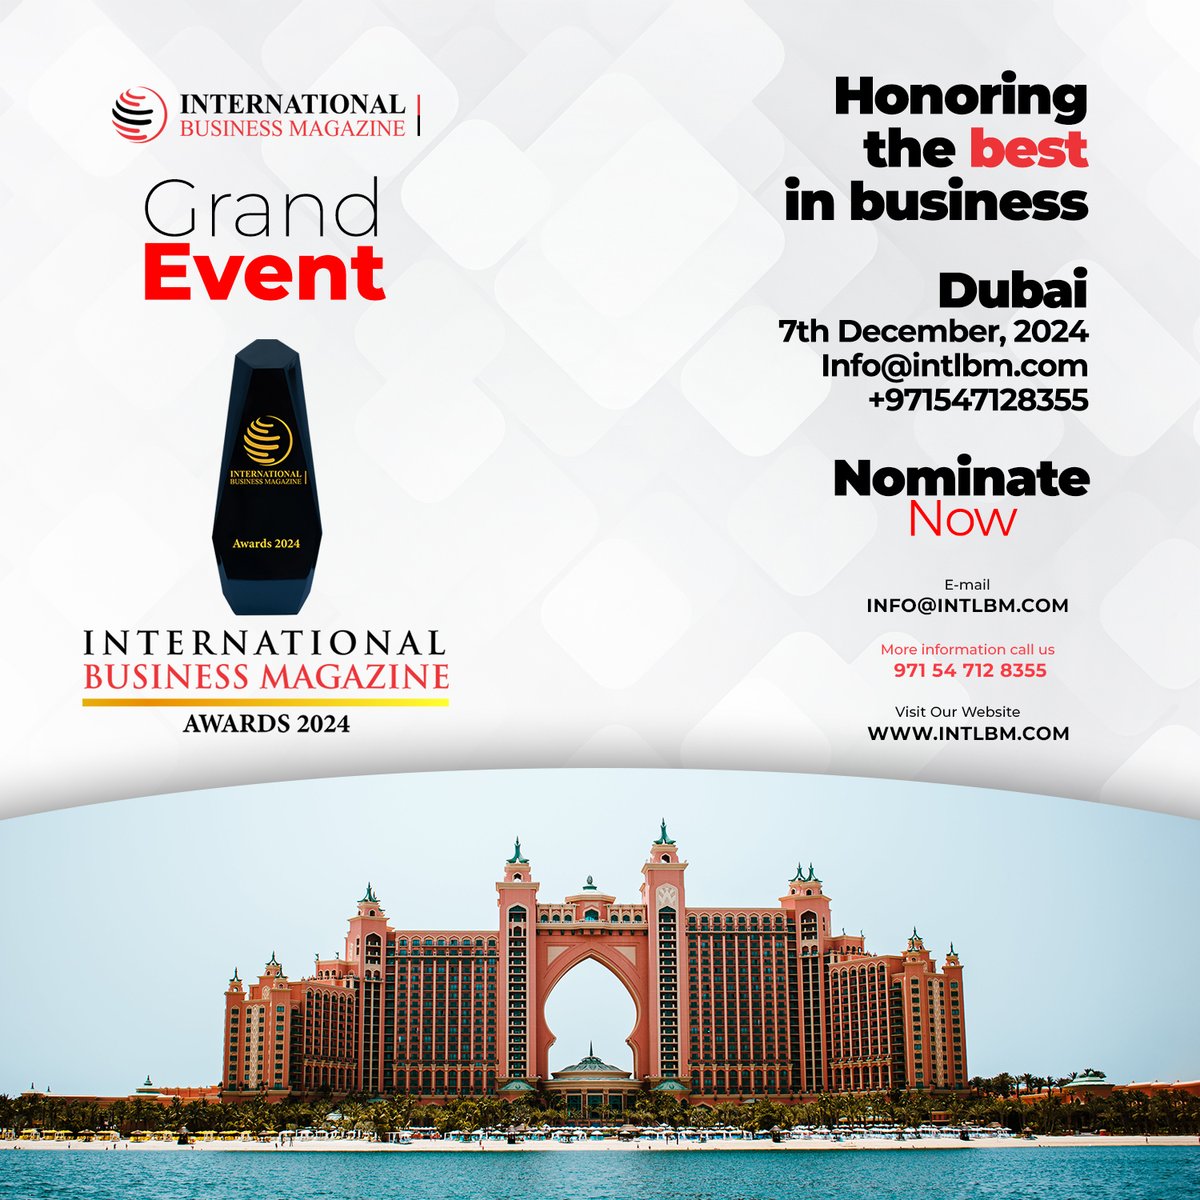 @ibmag_magazine proudly invites all lead professionals, CEOs, CXOs, and other decision-makers to embark on our Annual Awards Ceremony Journey on December 07th, 2024 at Atlantis The Palm Dubai, UAE. tinyurl.com/ytdpwsds
tinyurl.com/htx393xm
#nominatenow #awards #dubai #UAE